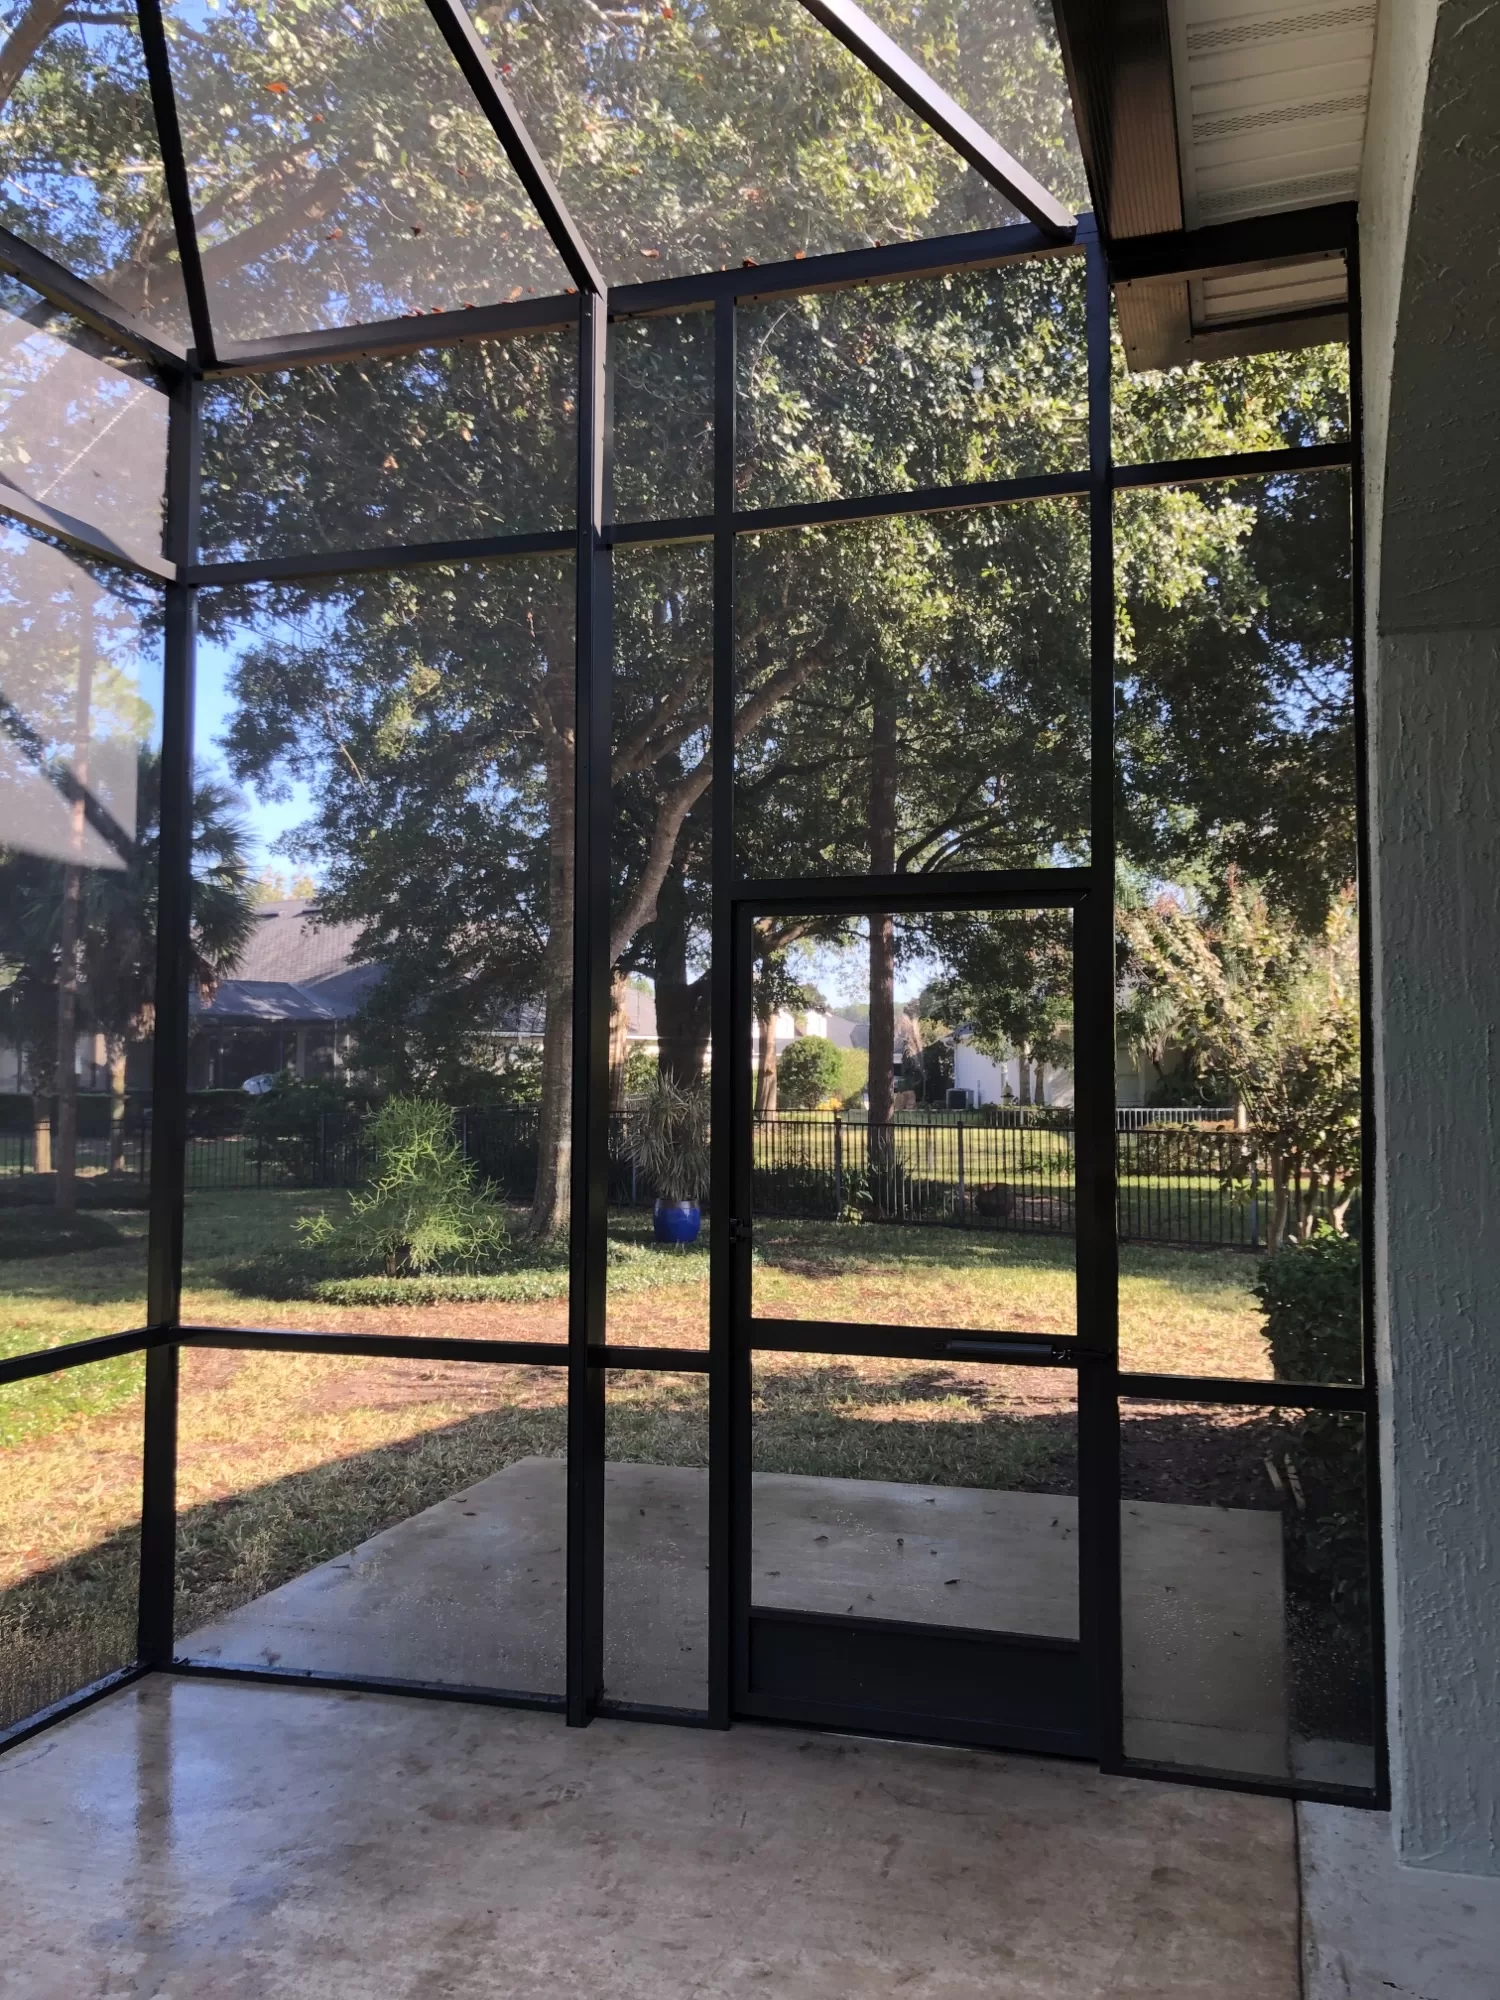 This bird cage build uses special screening that keeps even the smallest of insects out of this screened porch.